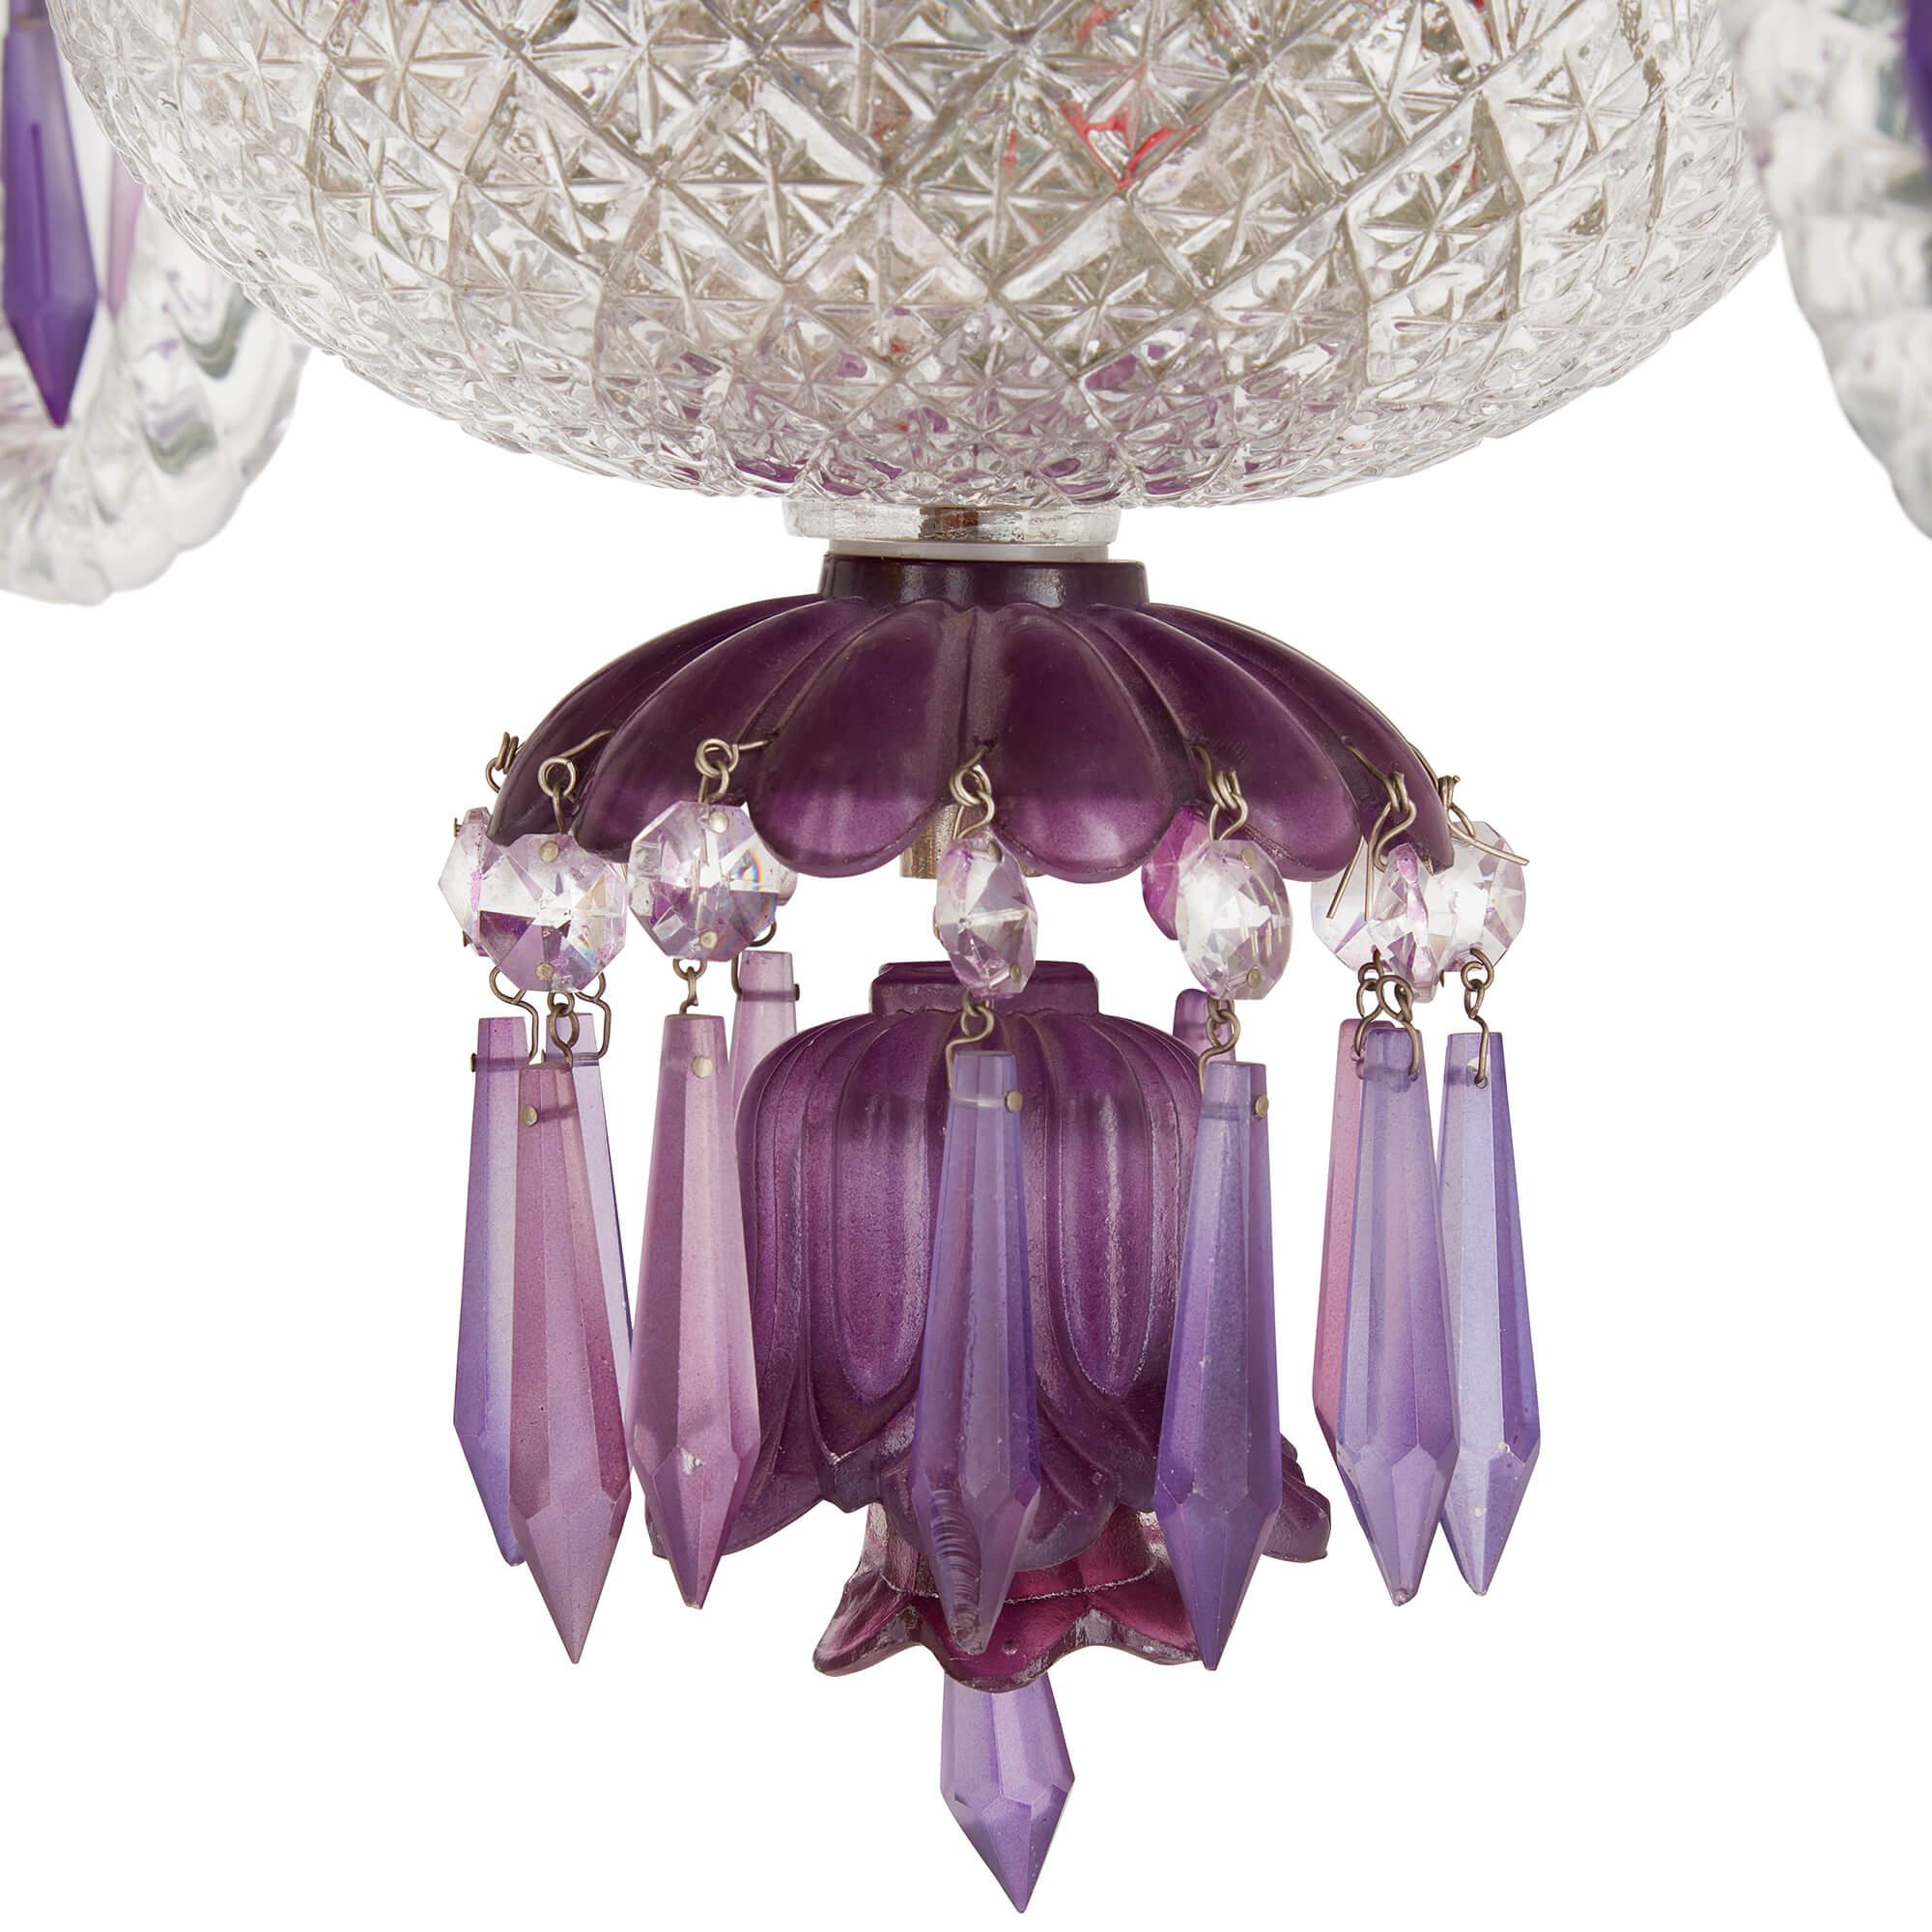 Clear and purple cut-glass chandelier in the Belle Époque style 
Continental, 20th Century
Height 74cm, diameter 76cm

This opulent chandelier is crafted in the lavish Belle Époque style, which dominated French design at the turn of the 20th